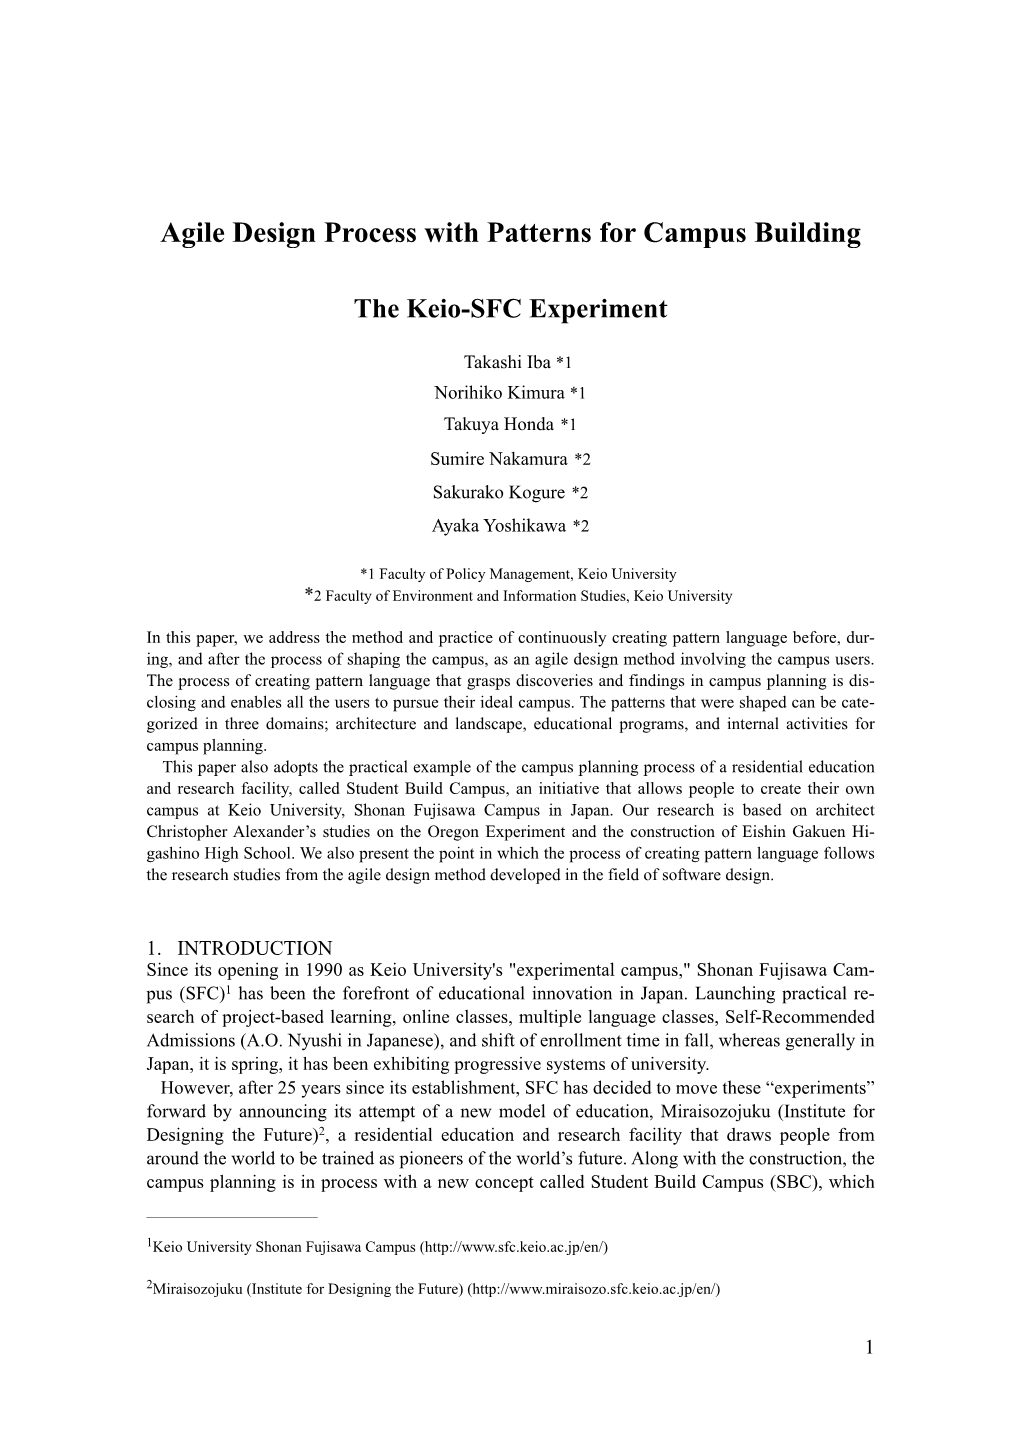 Agile Design Process with Patterns for Campus Building